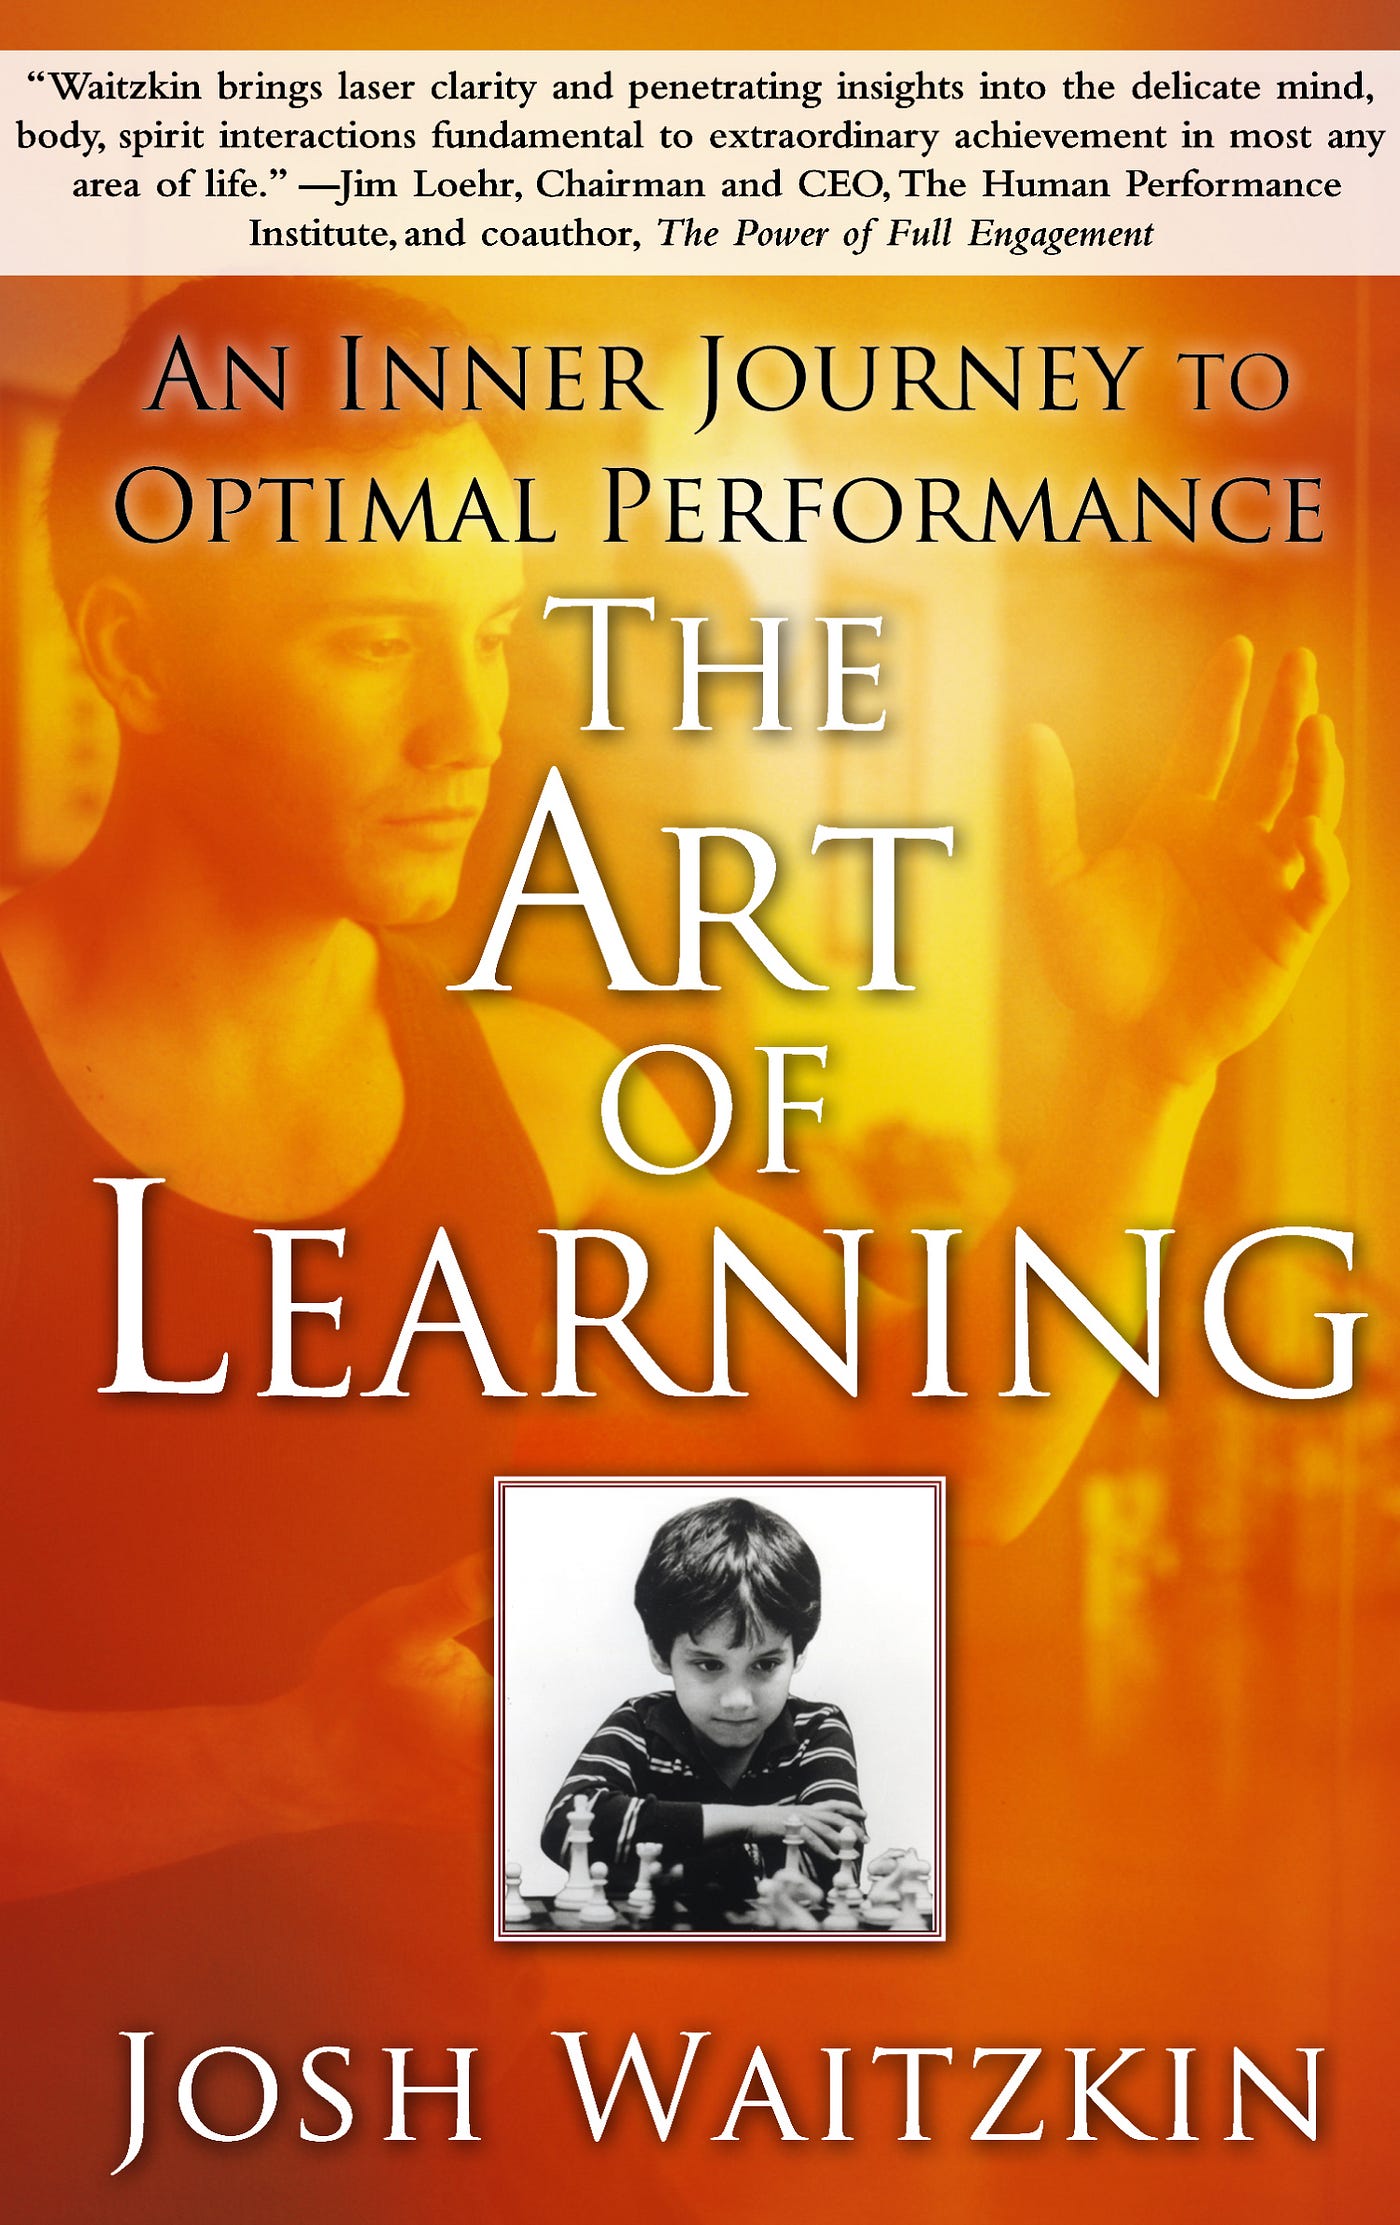 The Art Of Learning Summary - Four Minute Books